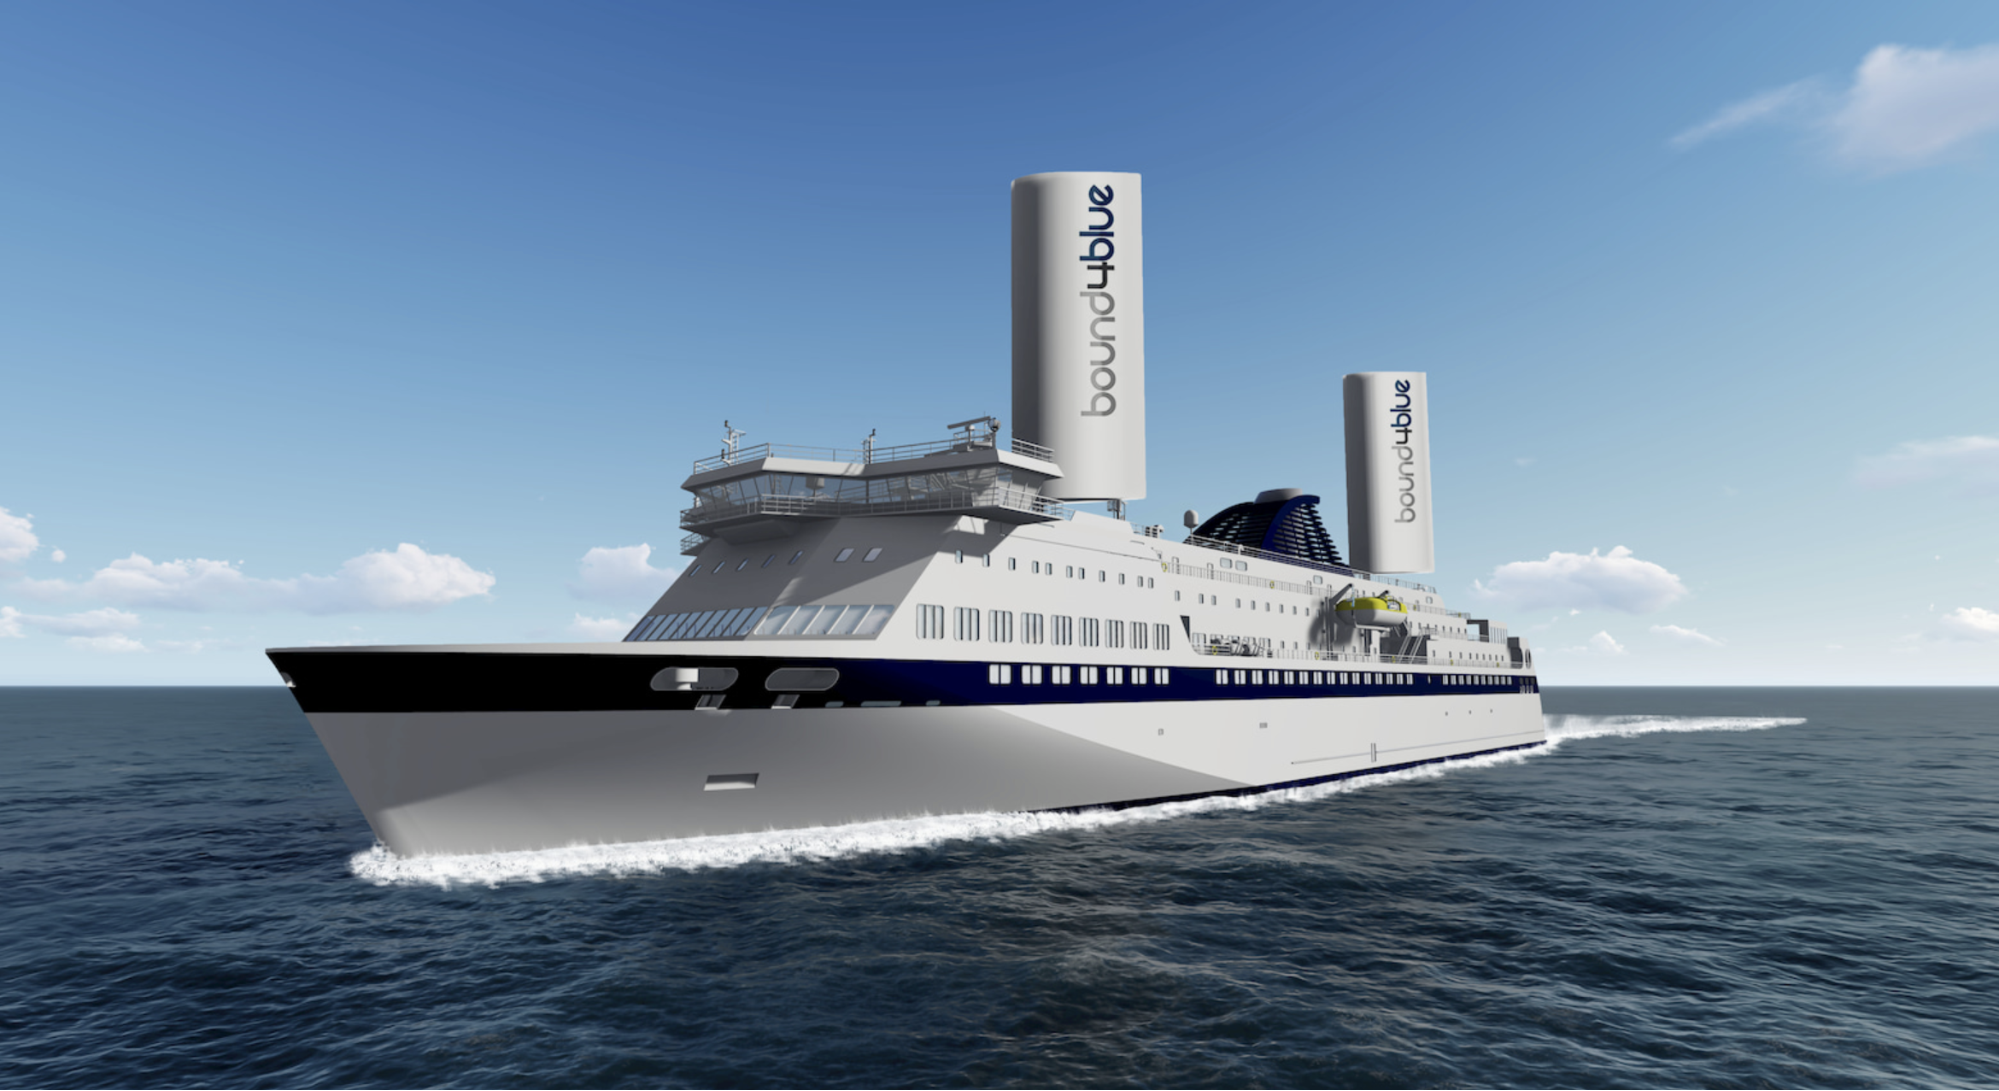 Bound4Blue will fit its first wingsail onto a vessel in 2020